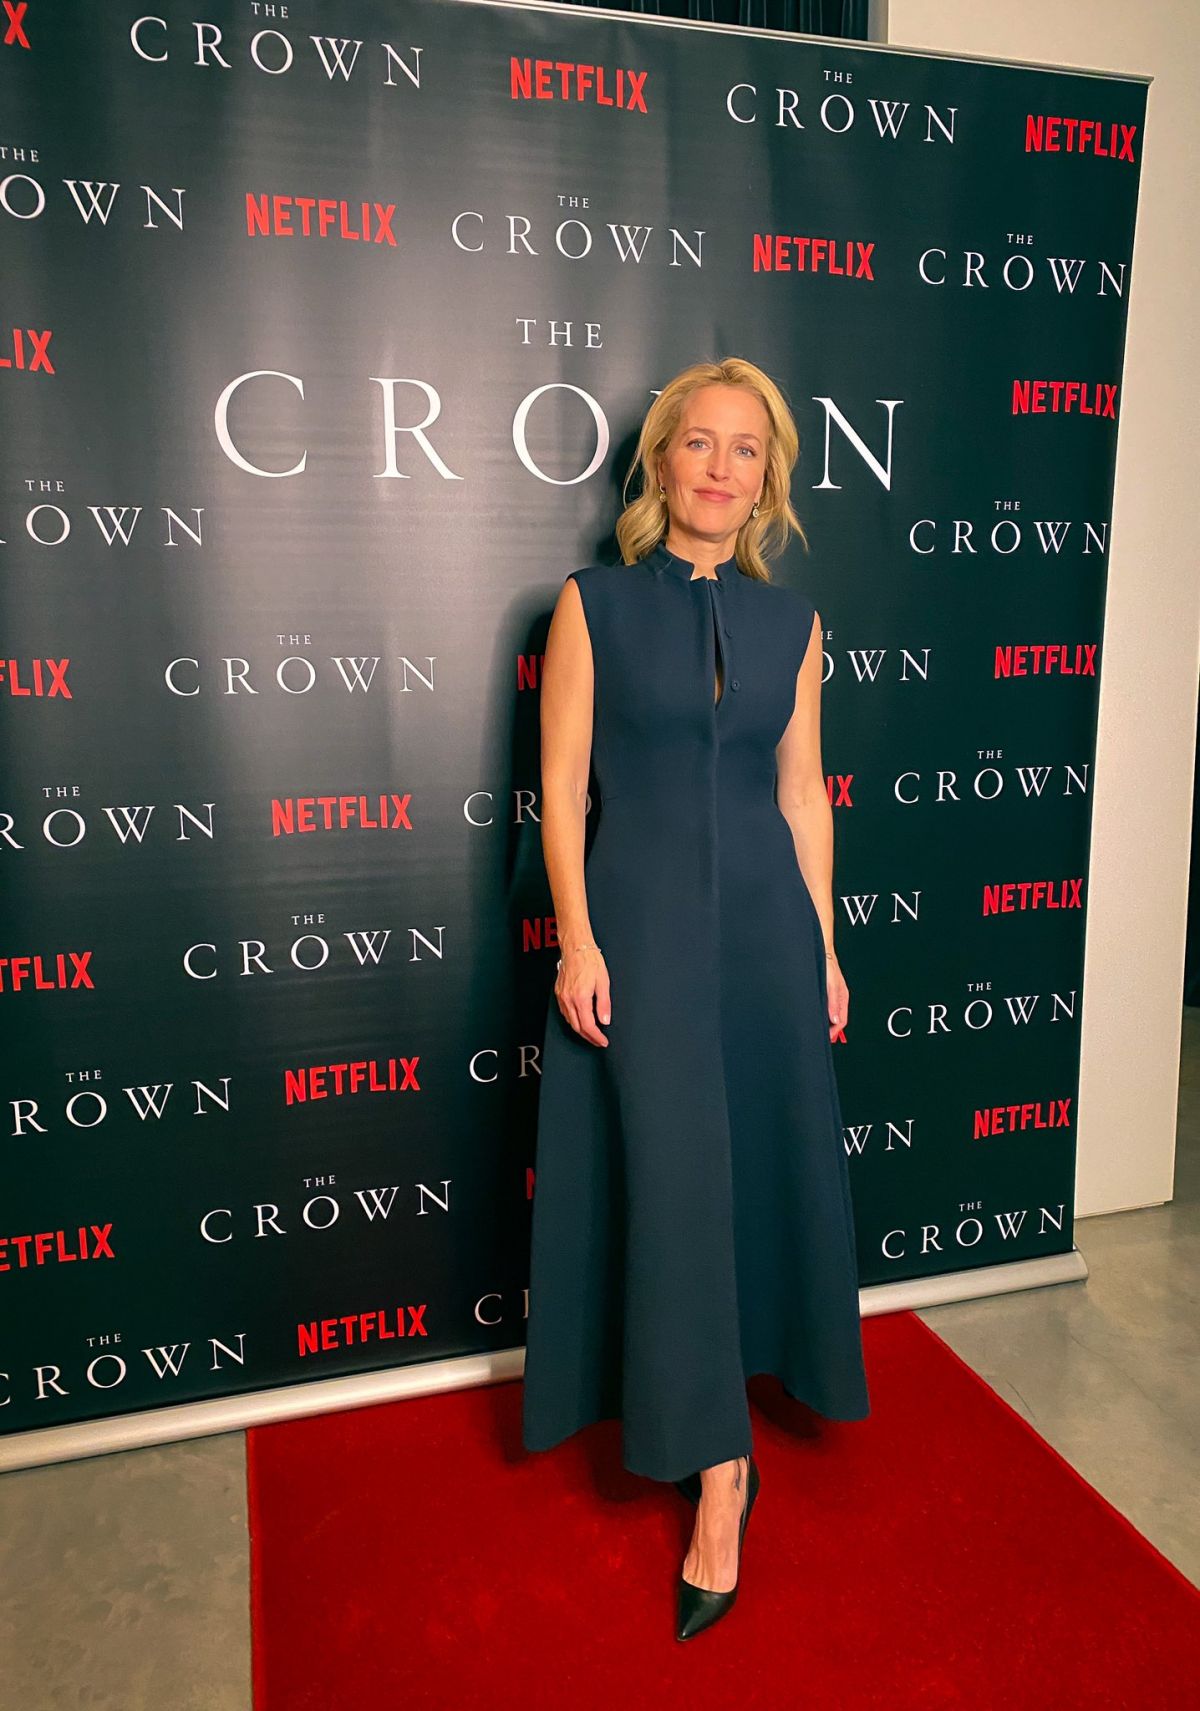 gillian-anderson-at-the-crown-season-4-virtual-premiere-from-his-kitchen-11-12-2020-1.jpg